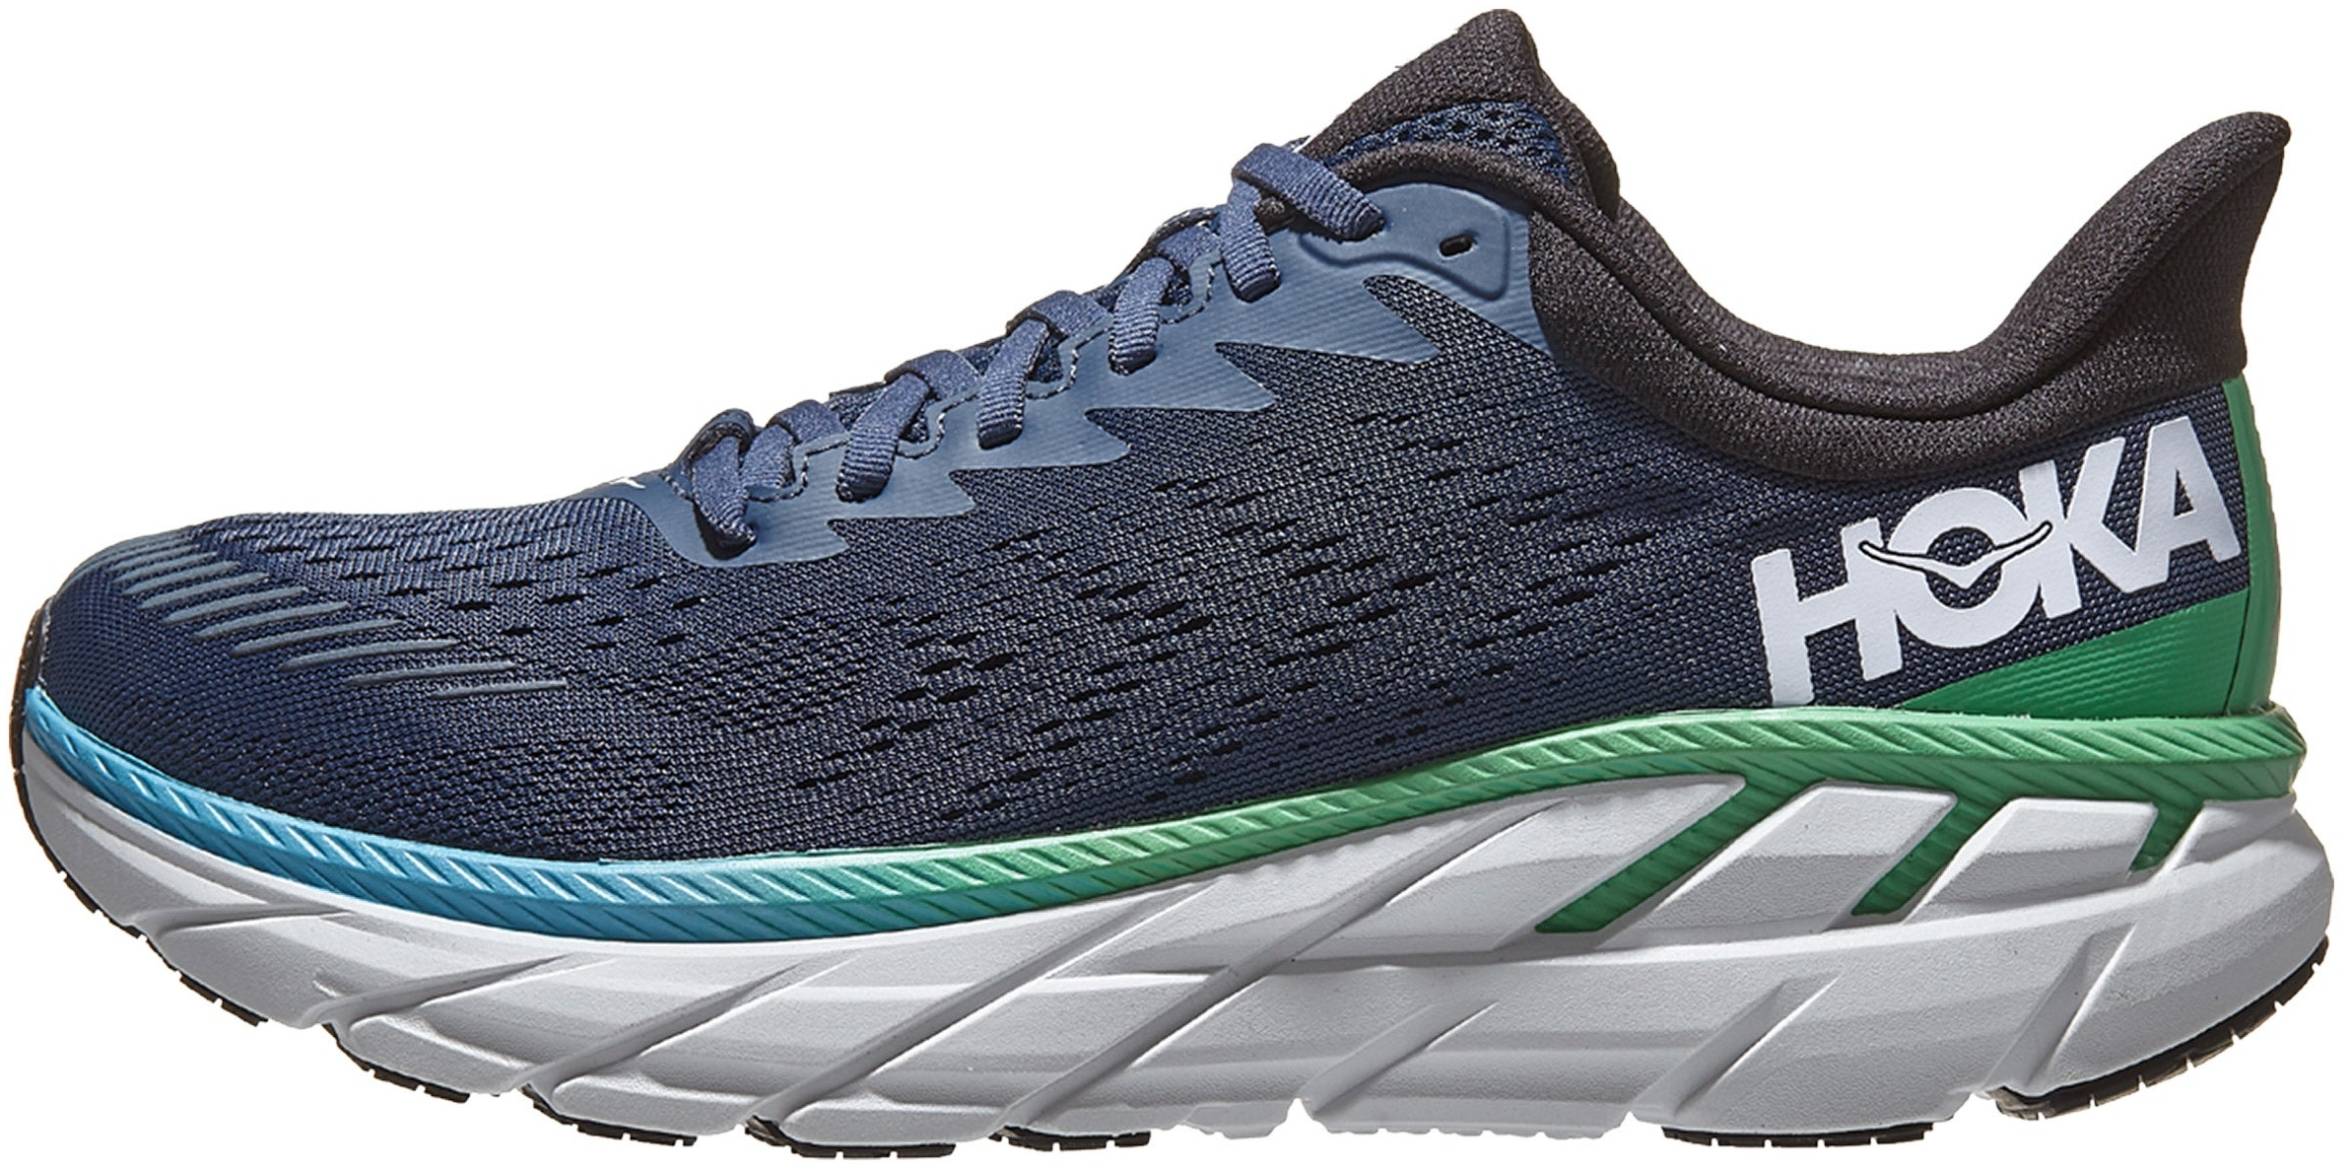 Review of Hoka One One Clifton 7 